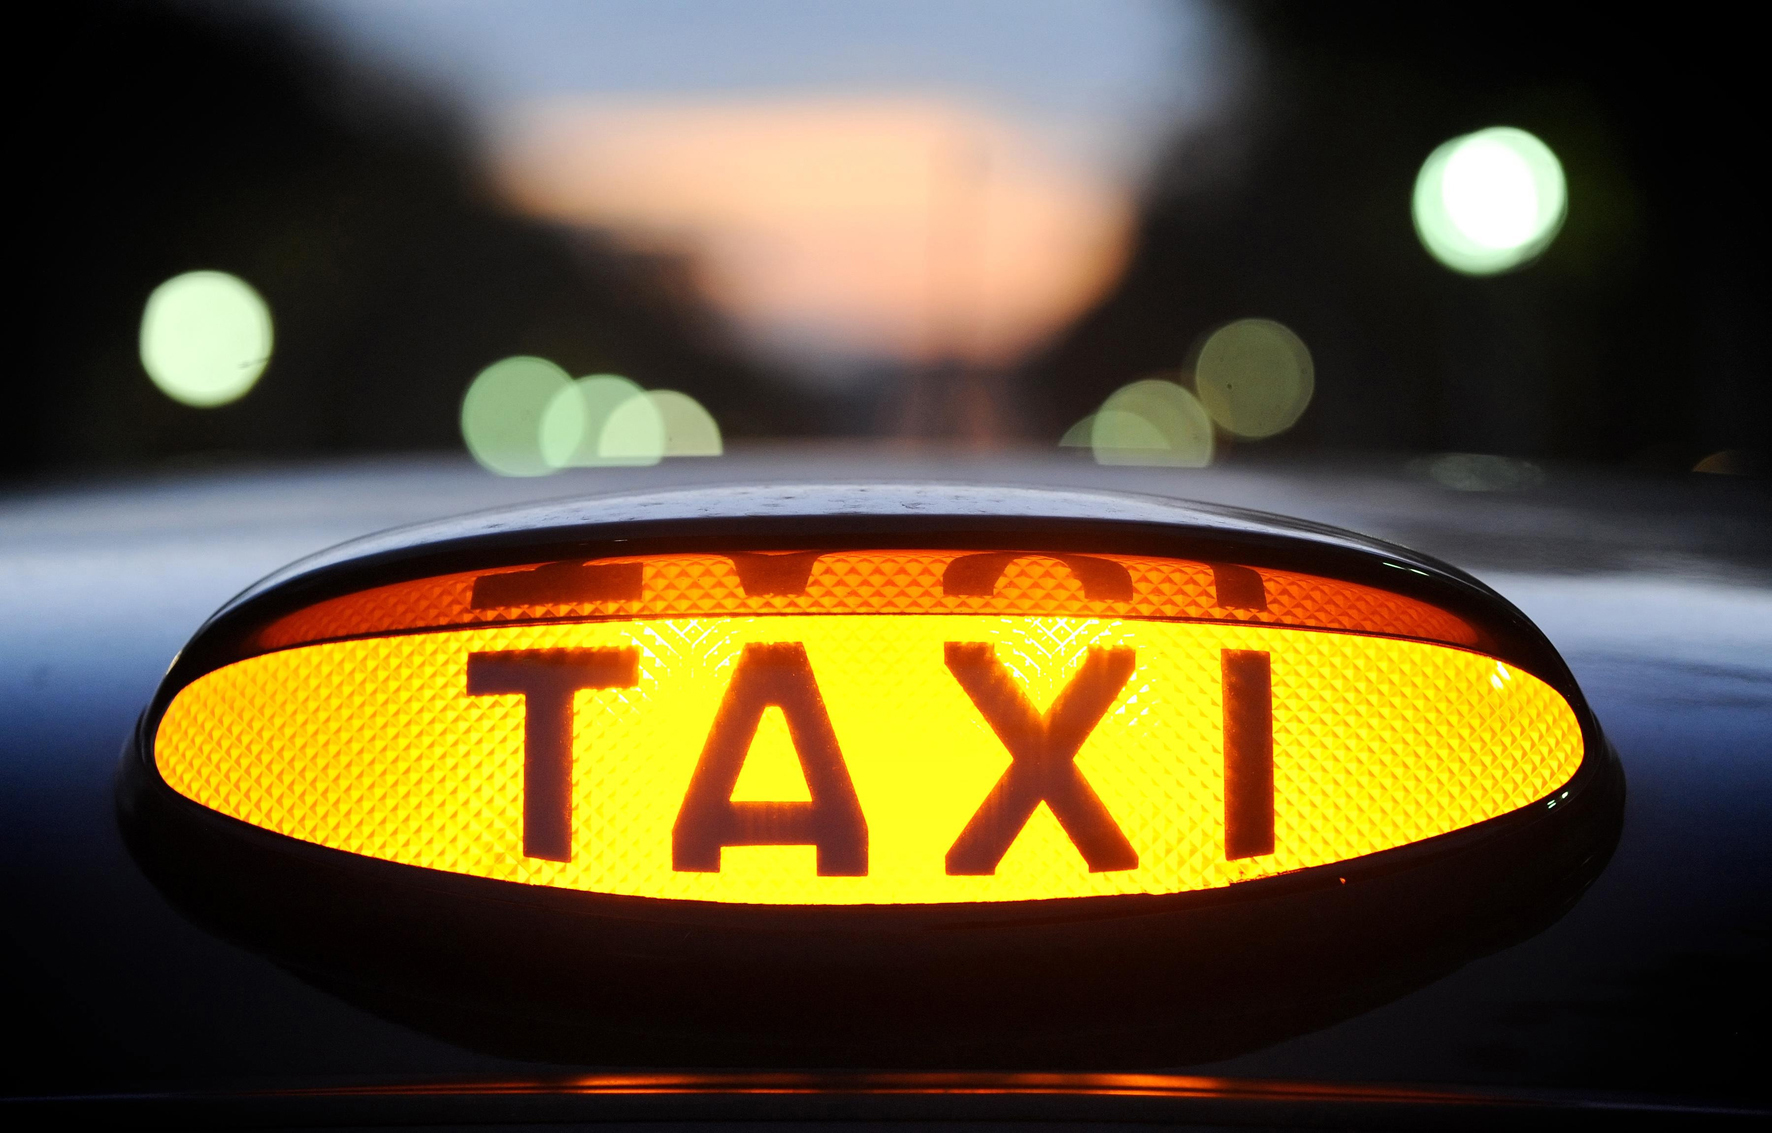 Secret Glasgow Taxi Driver: One type of chase a taxi driver can enjoy